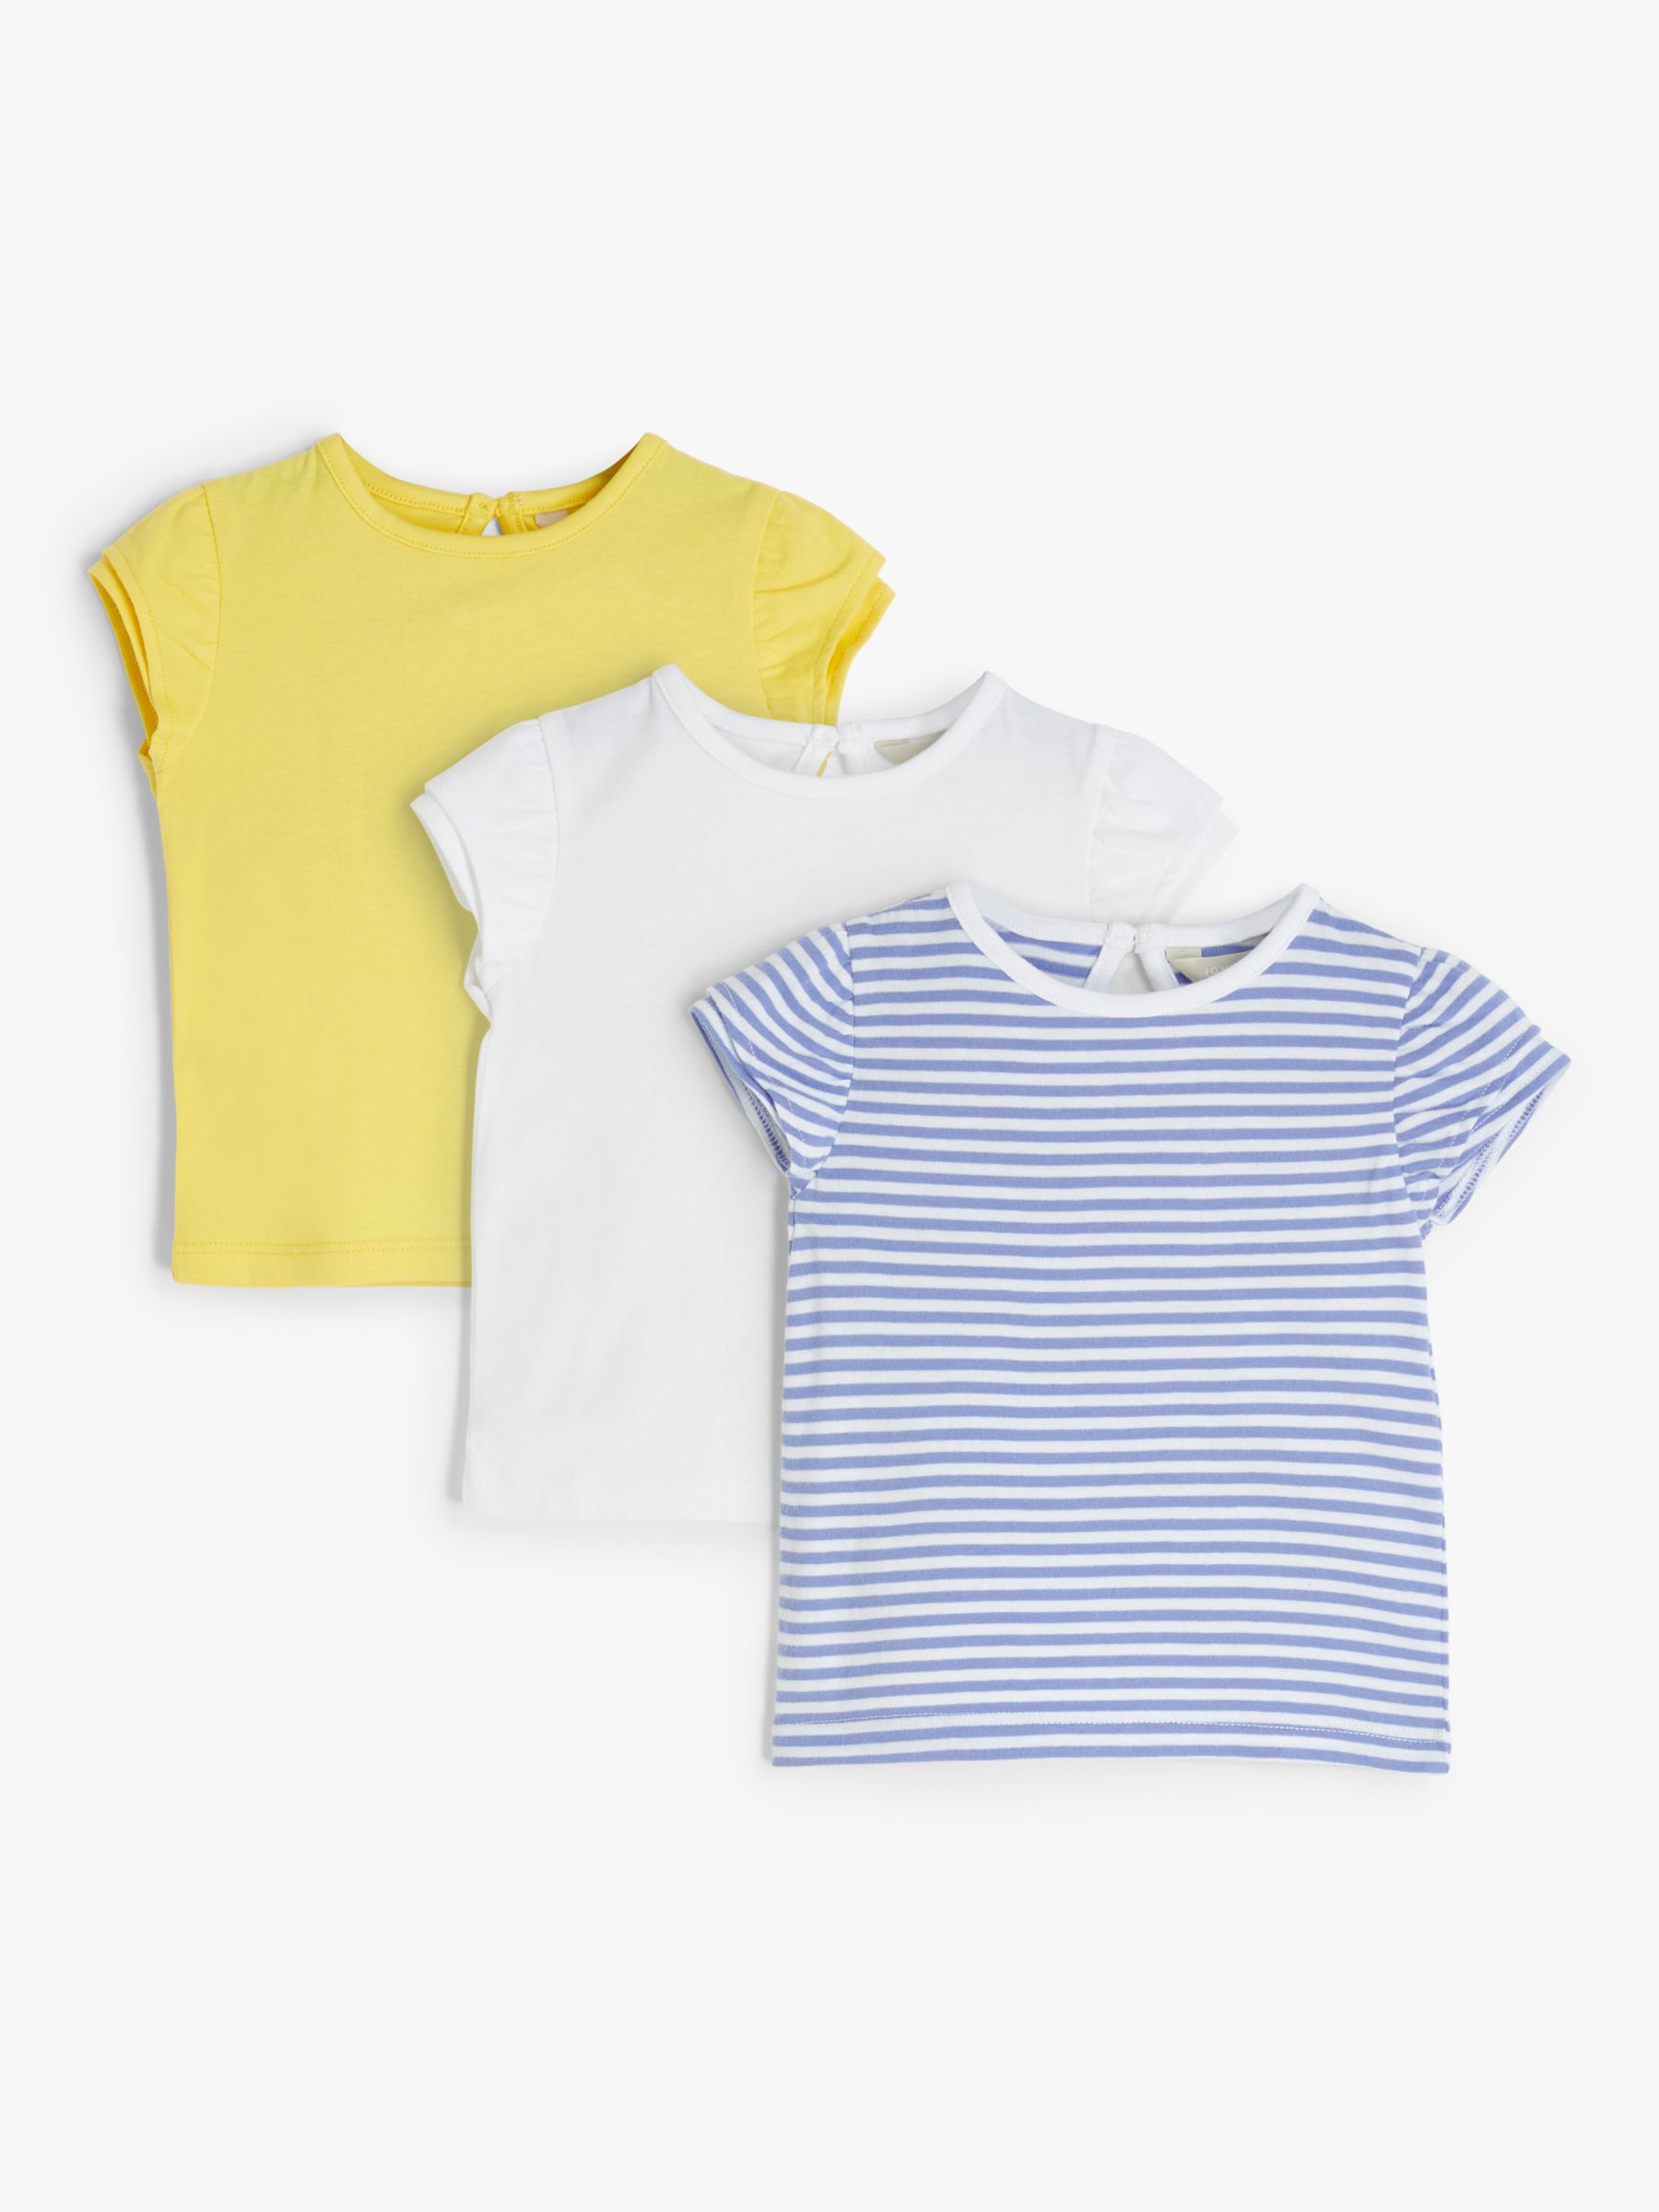 John Lewis & Partners Baby Frill Sleeve T-Shirt, Pack of 3, Multi